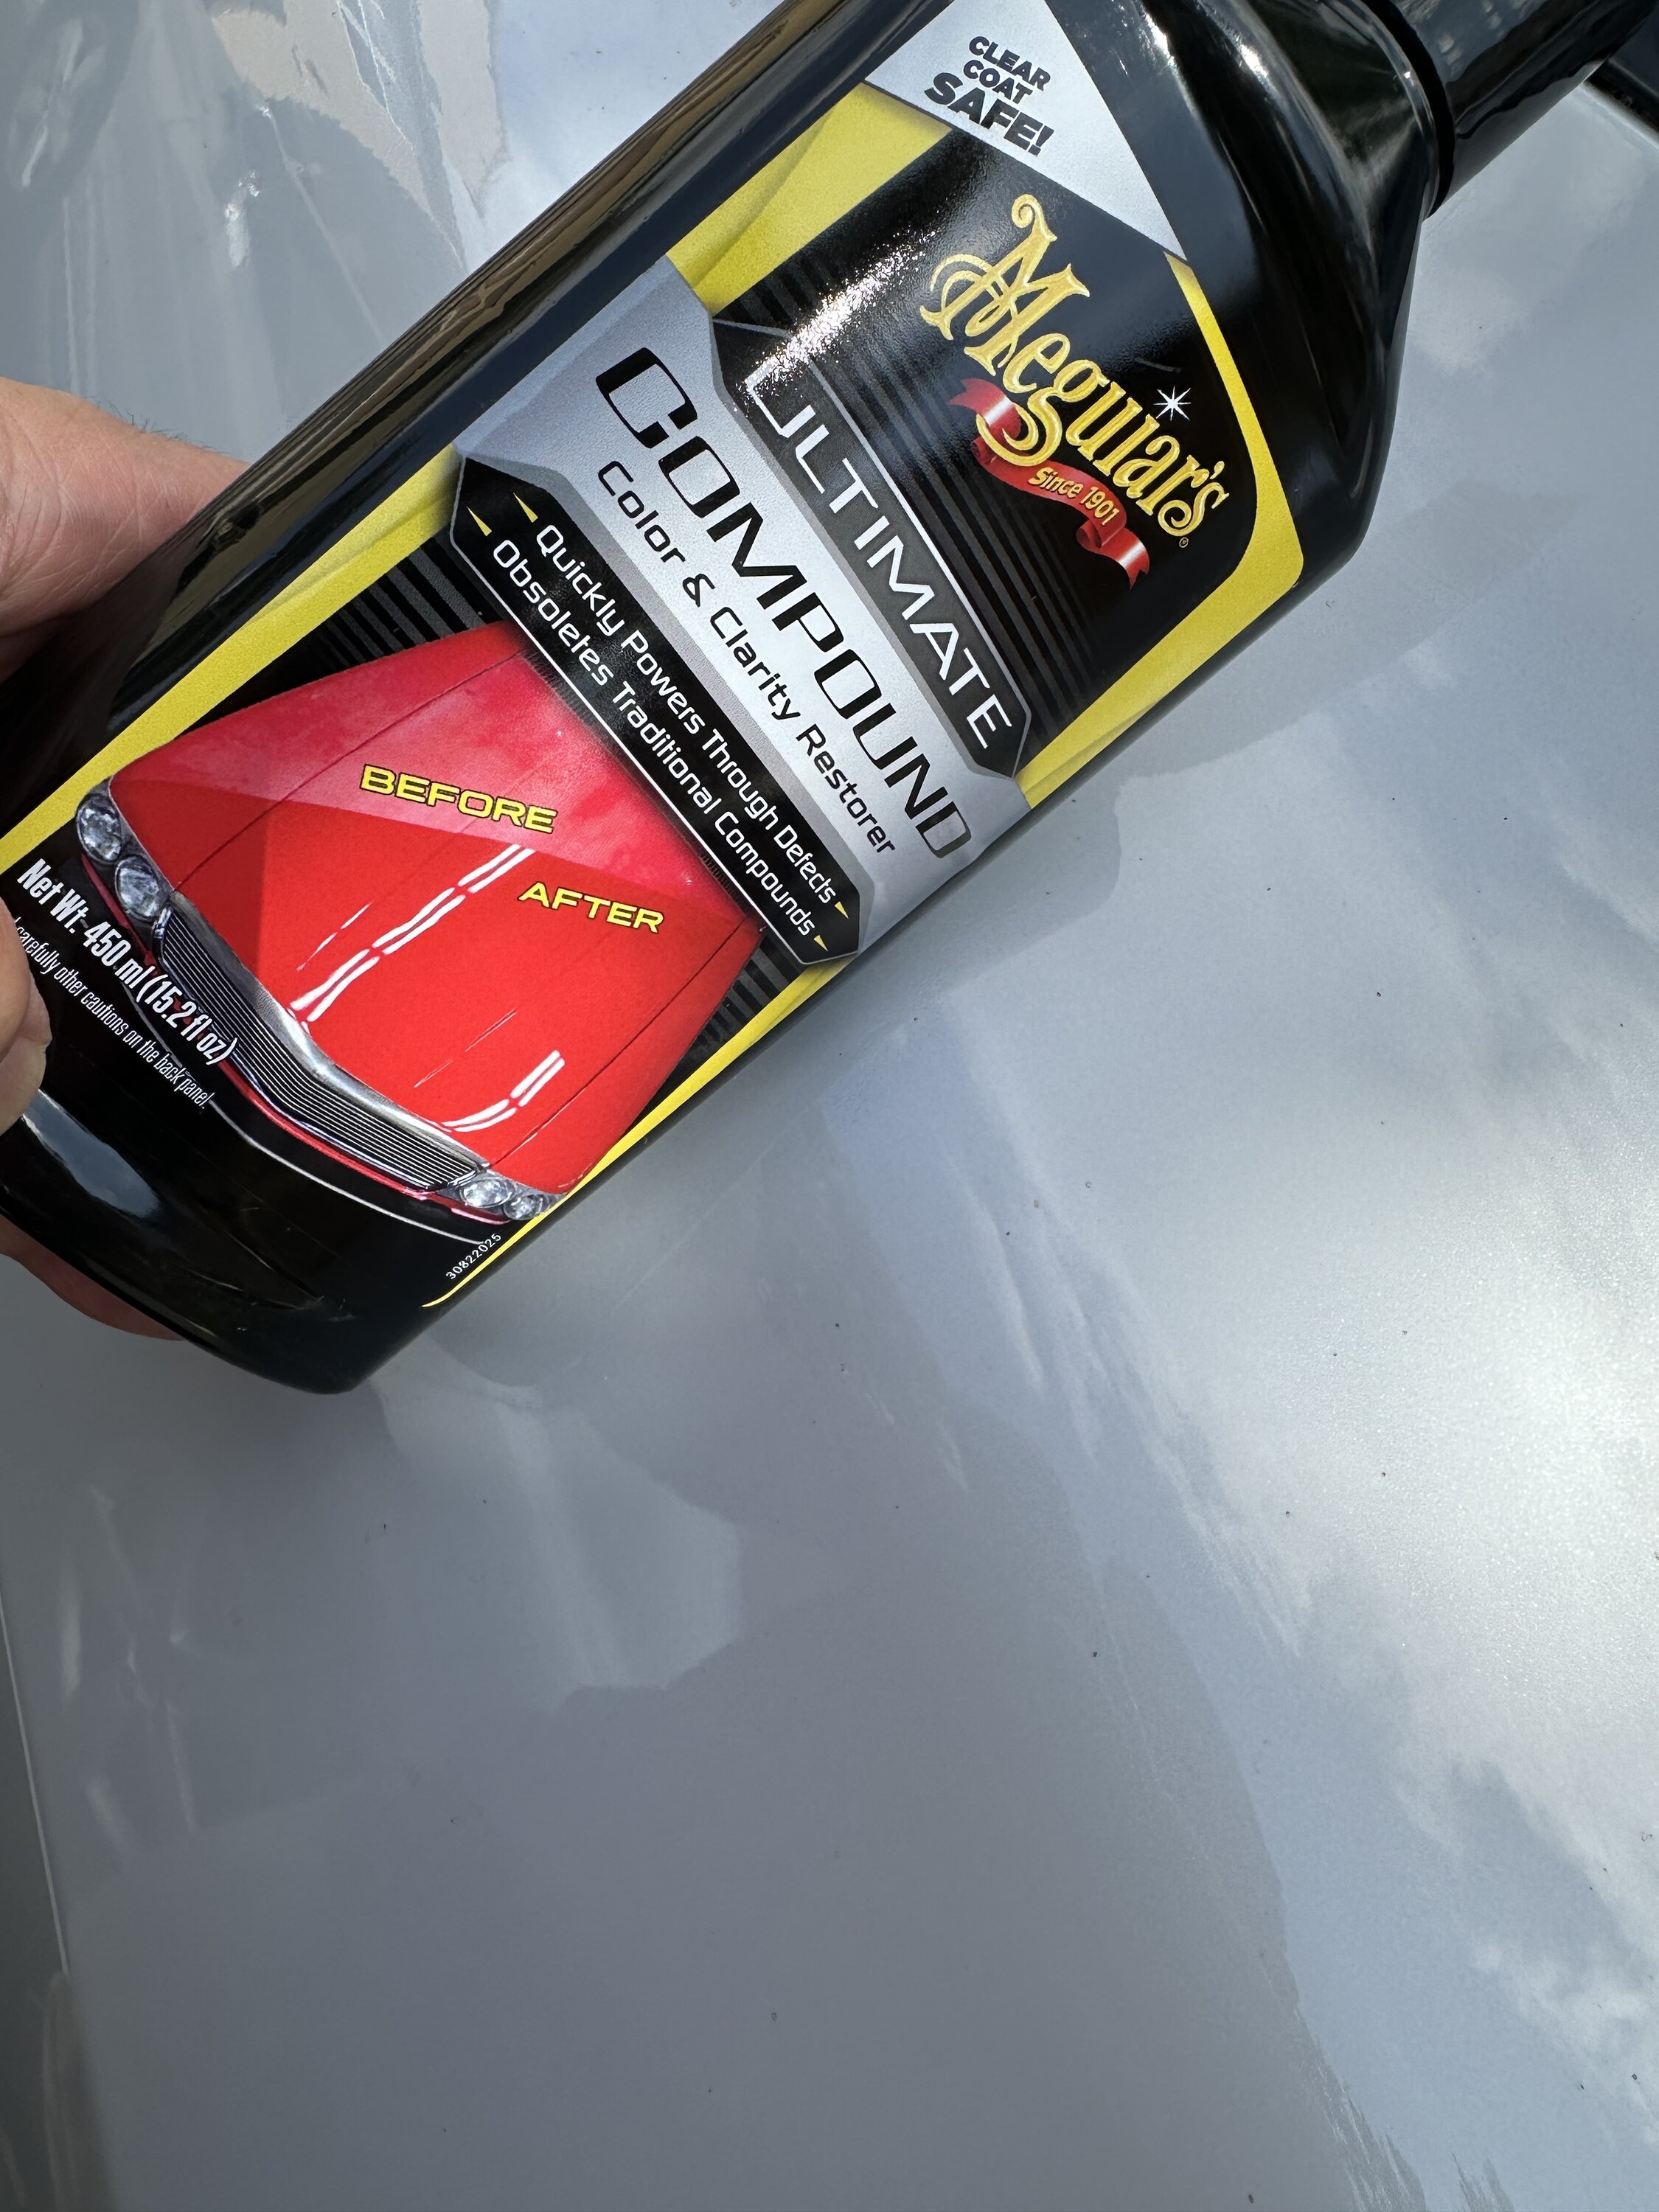  Meguiar'S Ultimate Compound Scratch Can Be Used By